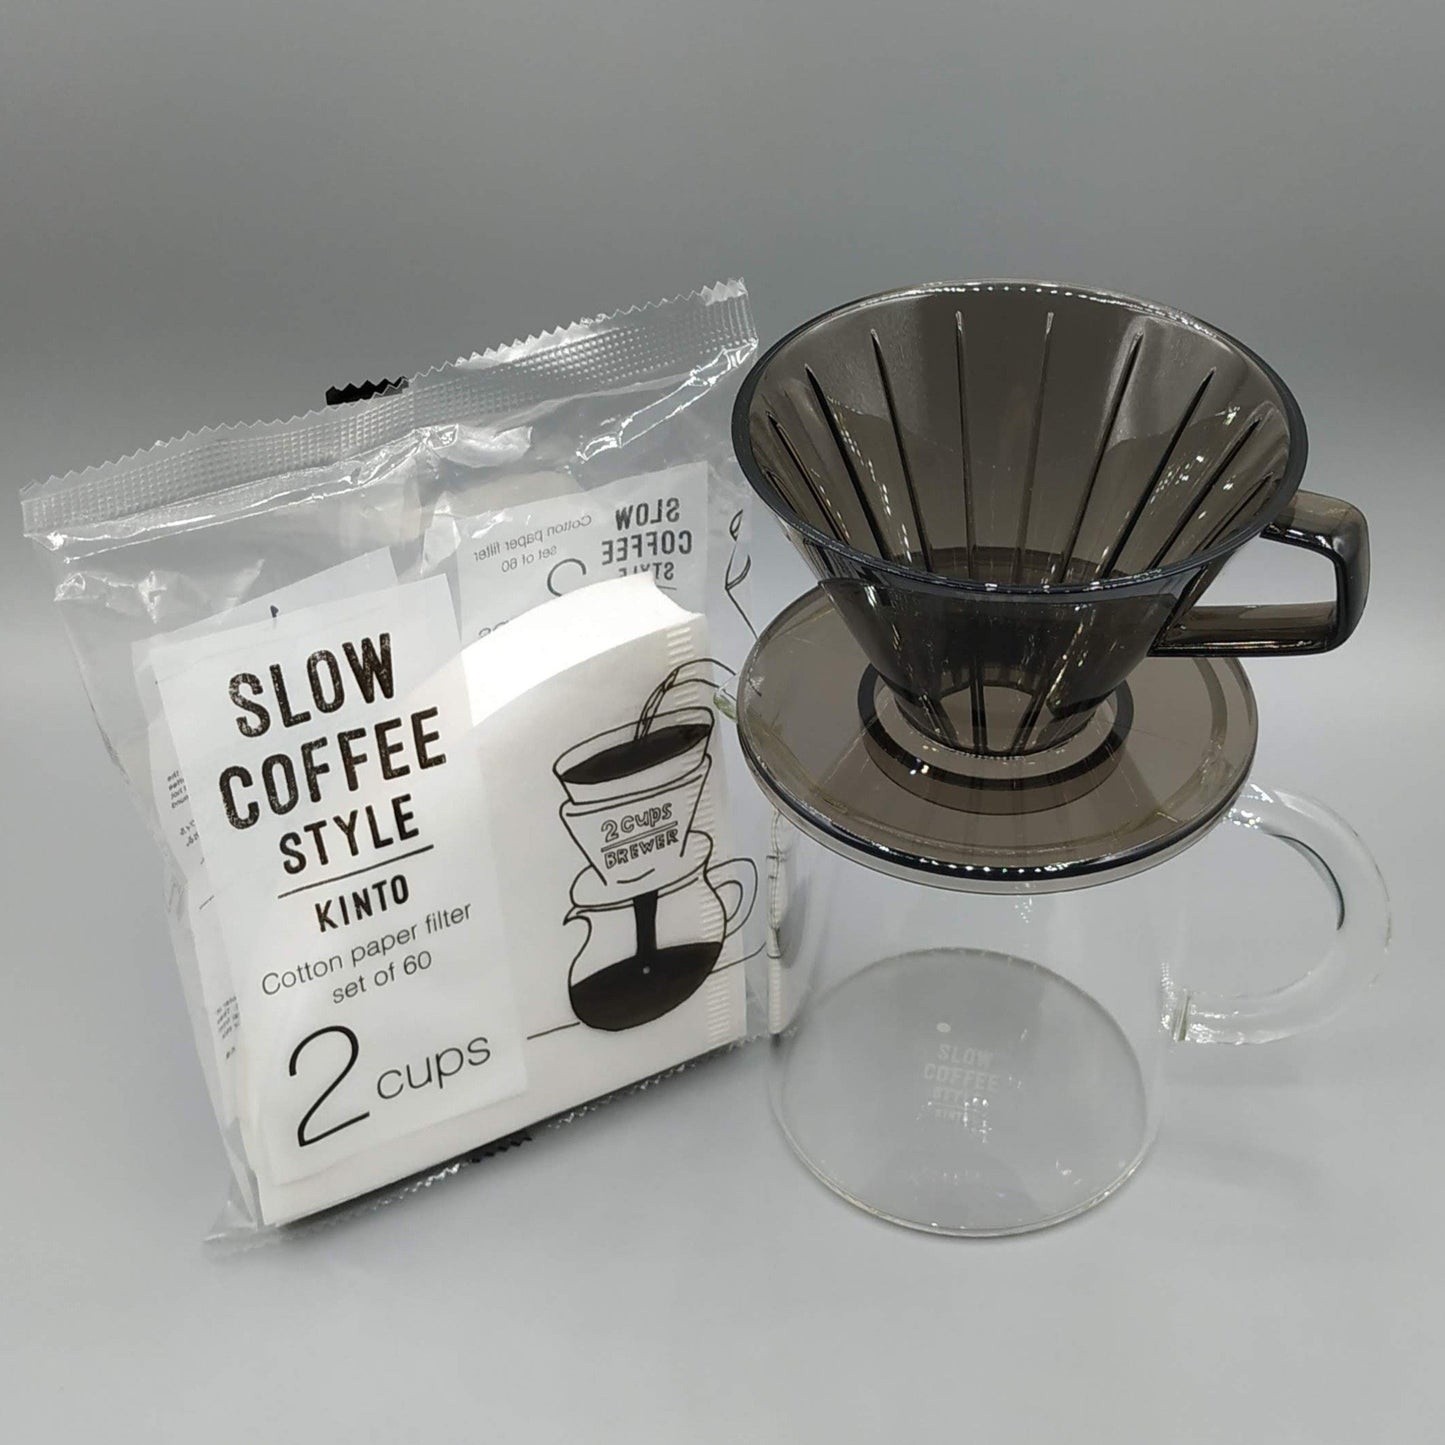 Kinto "Slow Coffee Style" brewing kit